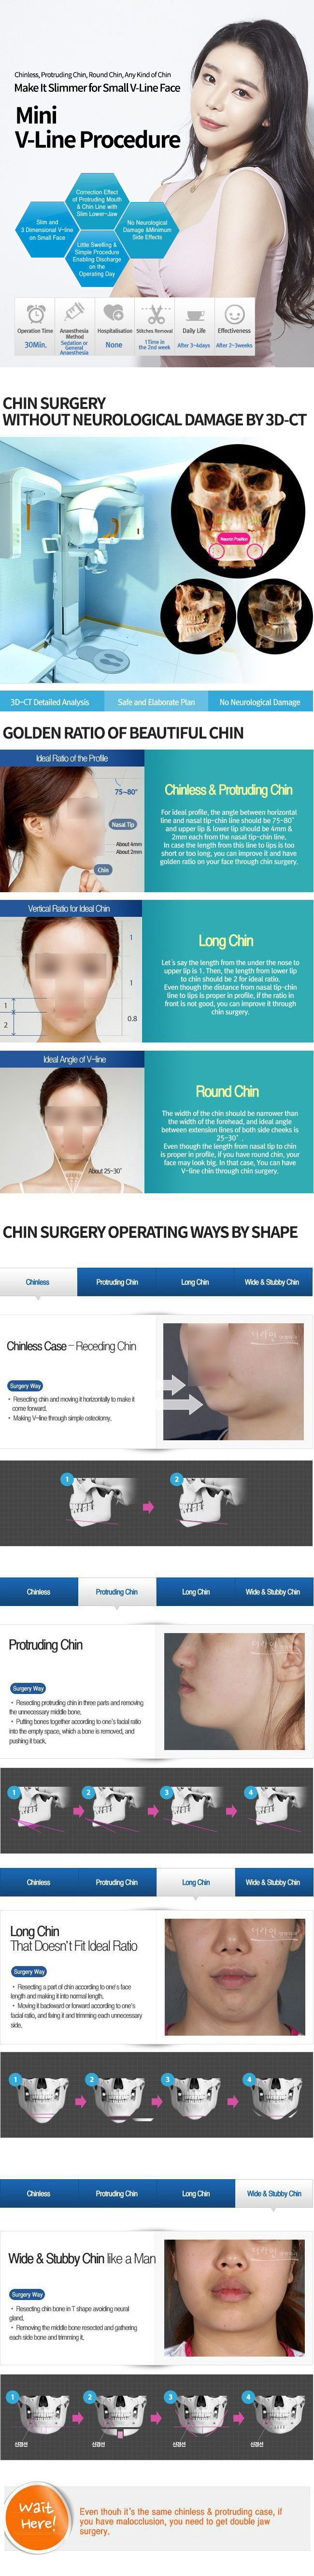 Chin Reduction & Implant Surgery (Before And After)